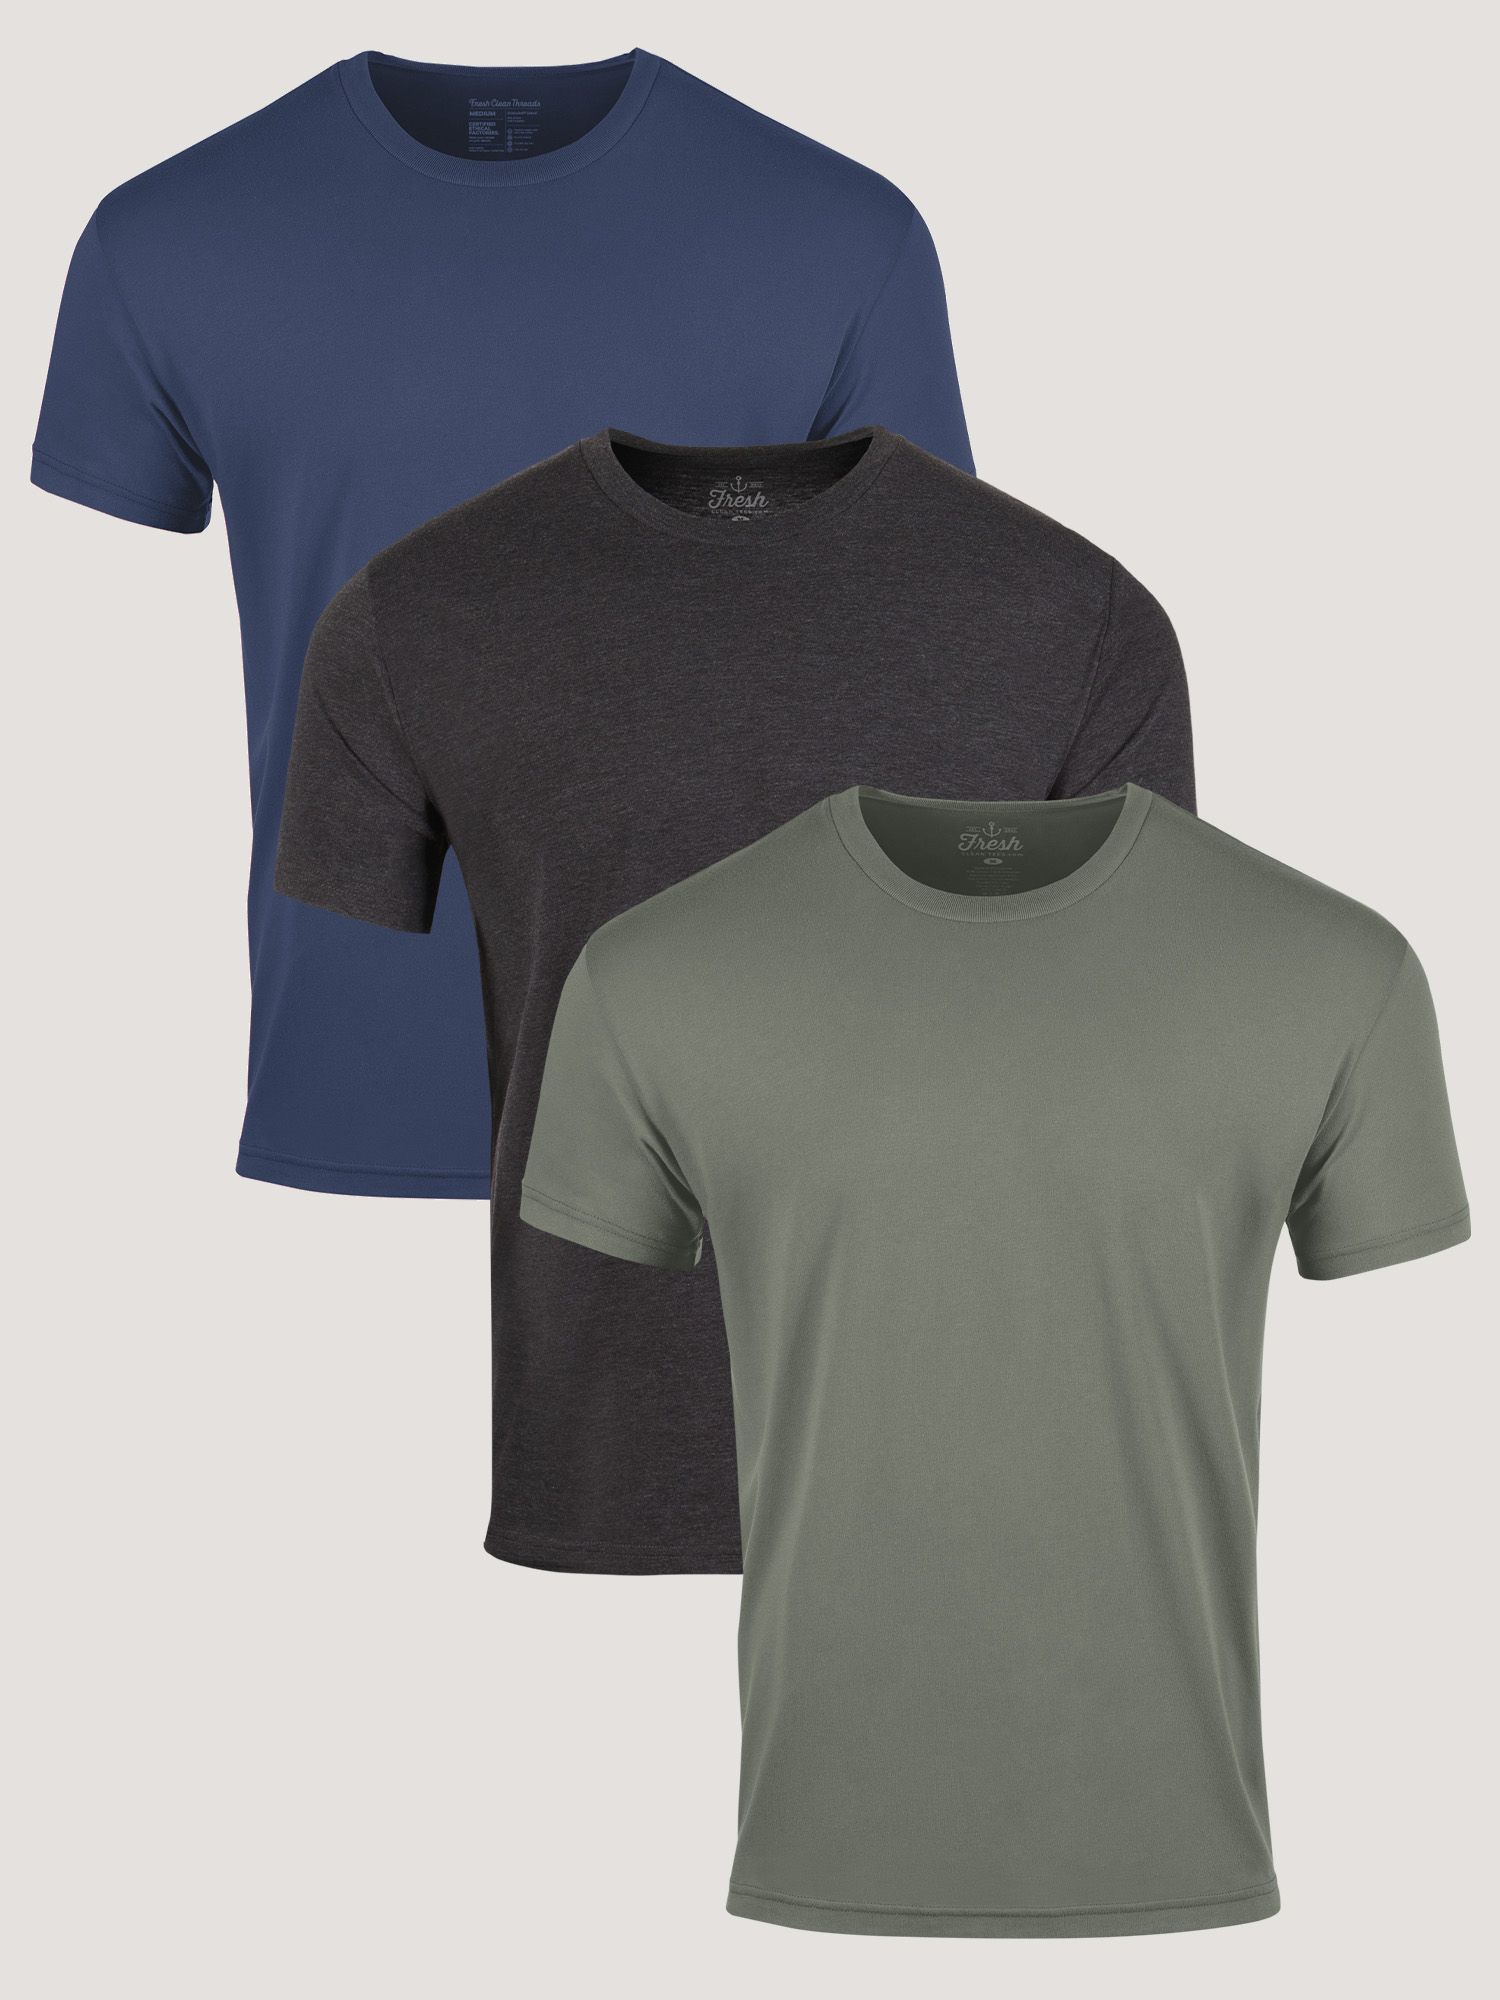 Bold 3-Pack of Men’s T-Shirts | Fresh Clean Threads